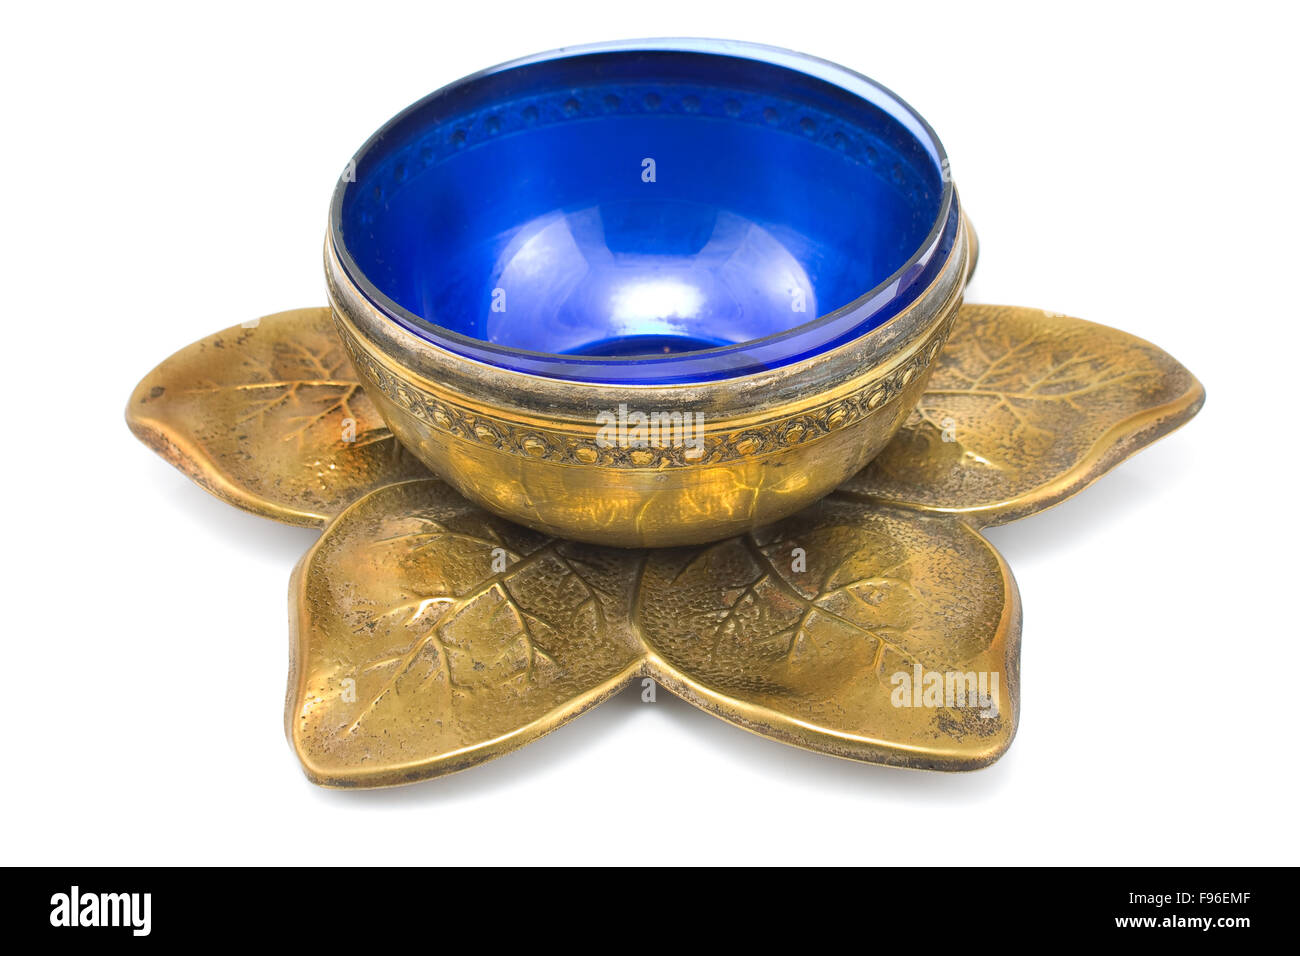 Antique brass pot with blue glass isolated on white Stock Photo